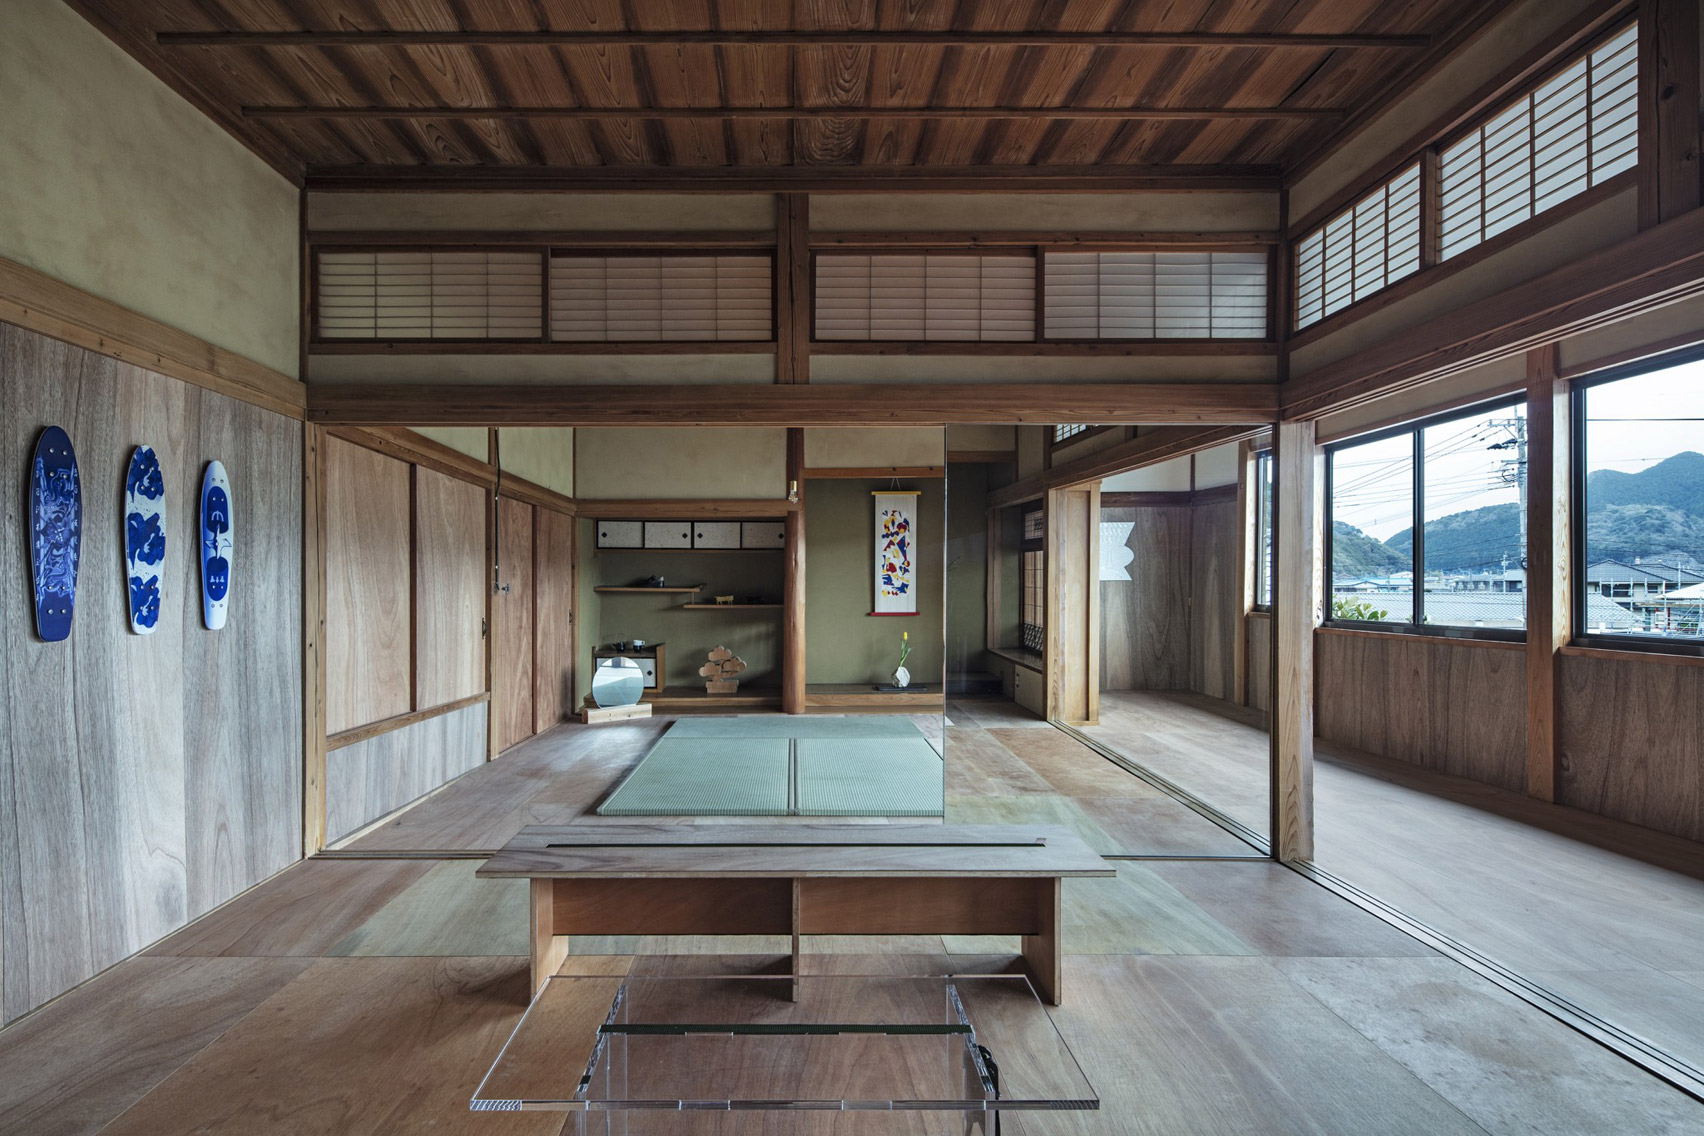 Artists workshop with wooden flooring in traditional Japanese house converted into office by DDAA Inc